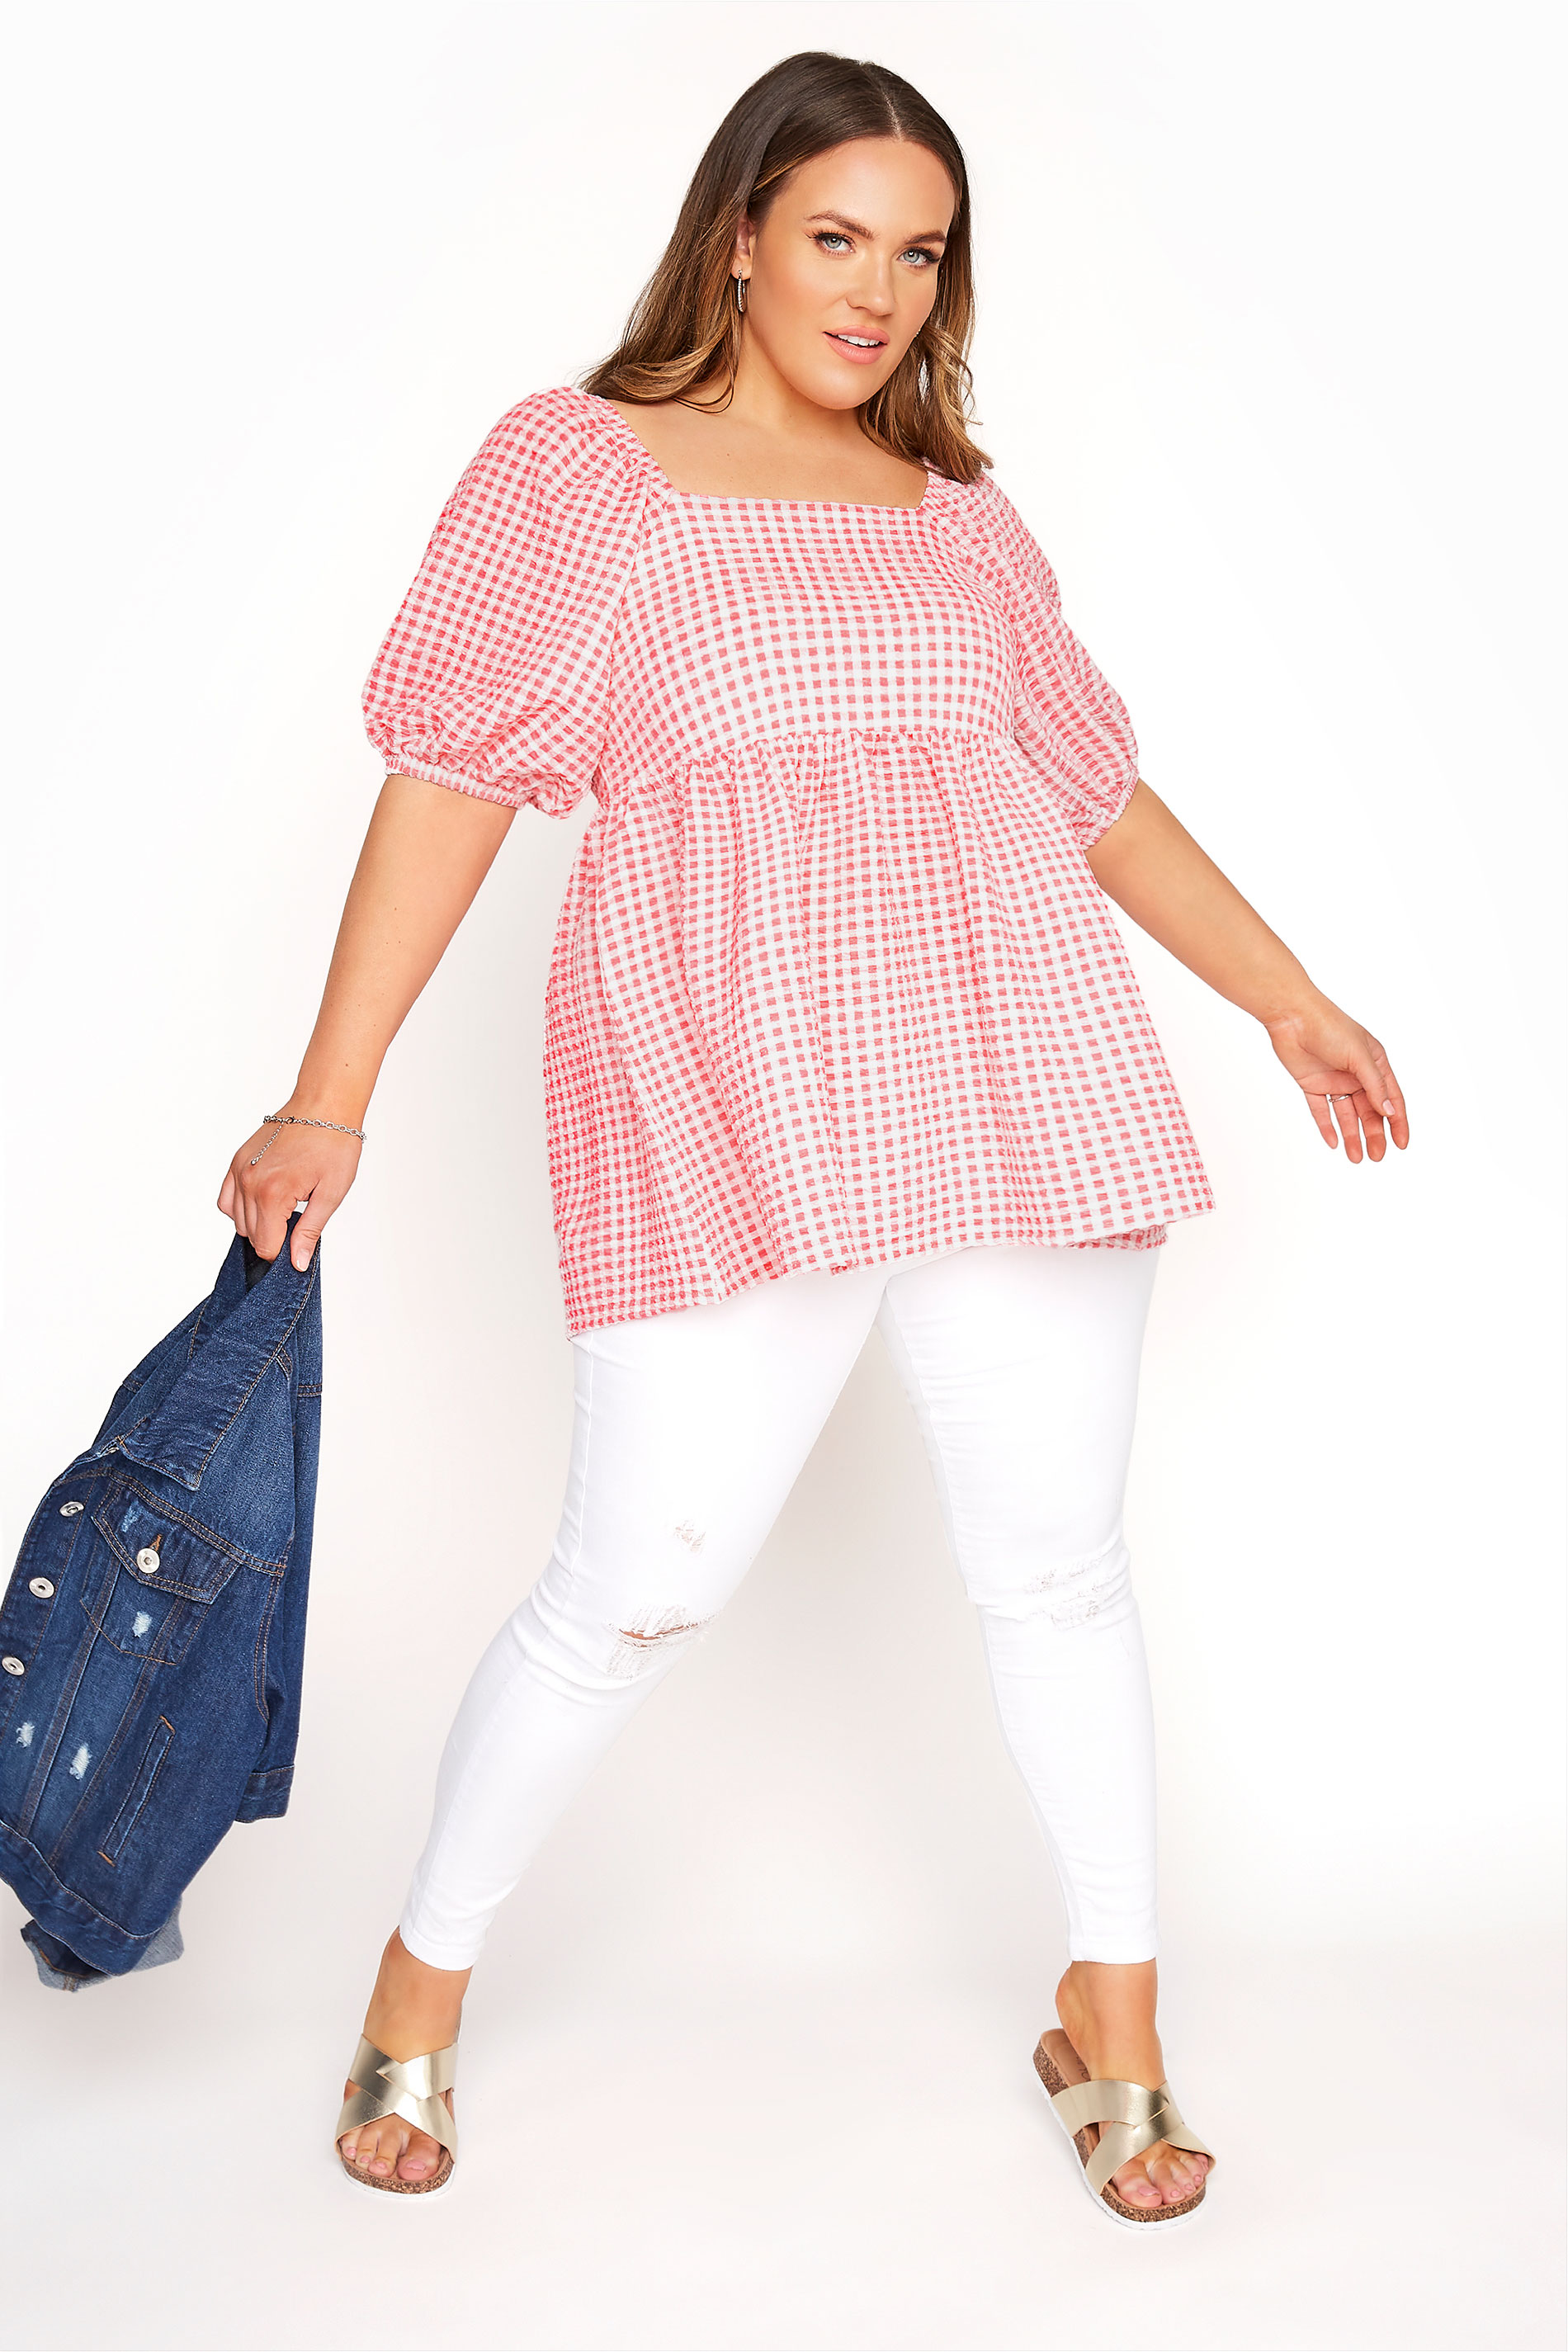 Grande taille  Tops Grande taille  Tops Casual | LIMITED COLLECTION - Top Corail à Carreaux Manches Bouffantes - OE99983